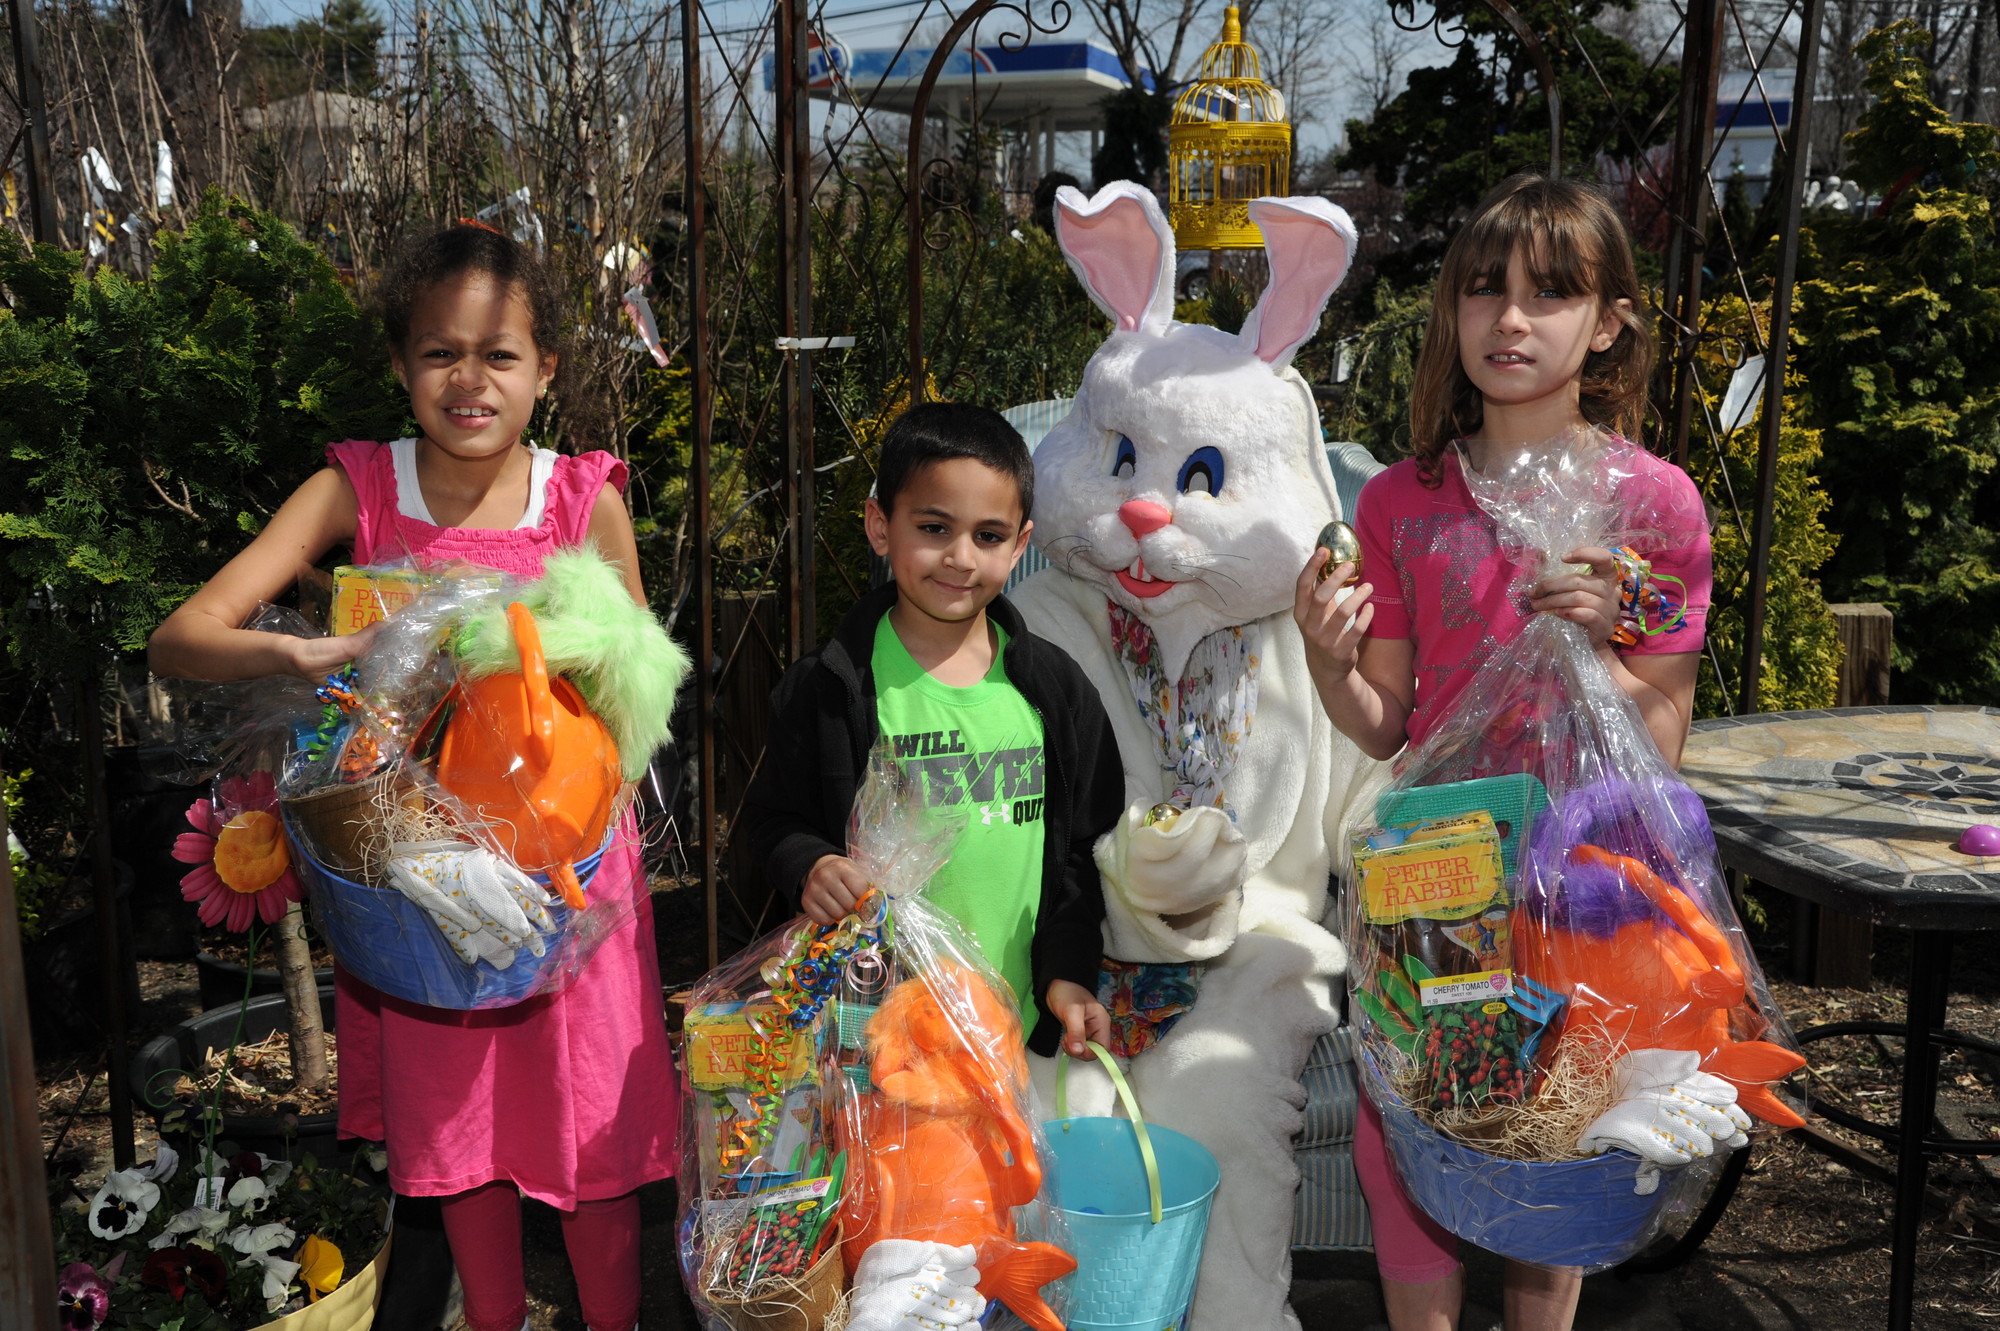 golden egg winners Ava Marie Hyat, 8, left, Anthony Paradiso, 7, and Serena Palmer, 8, with a holiday friend.